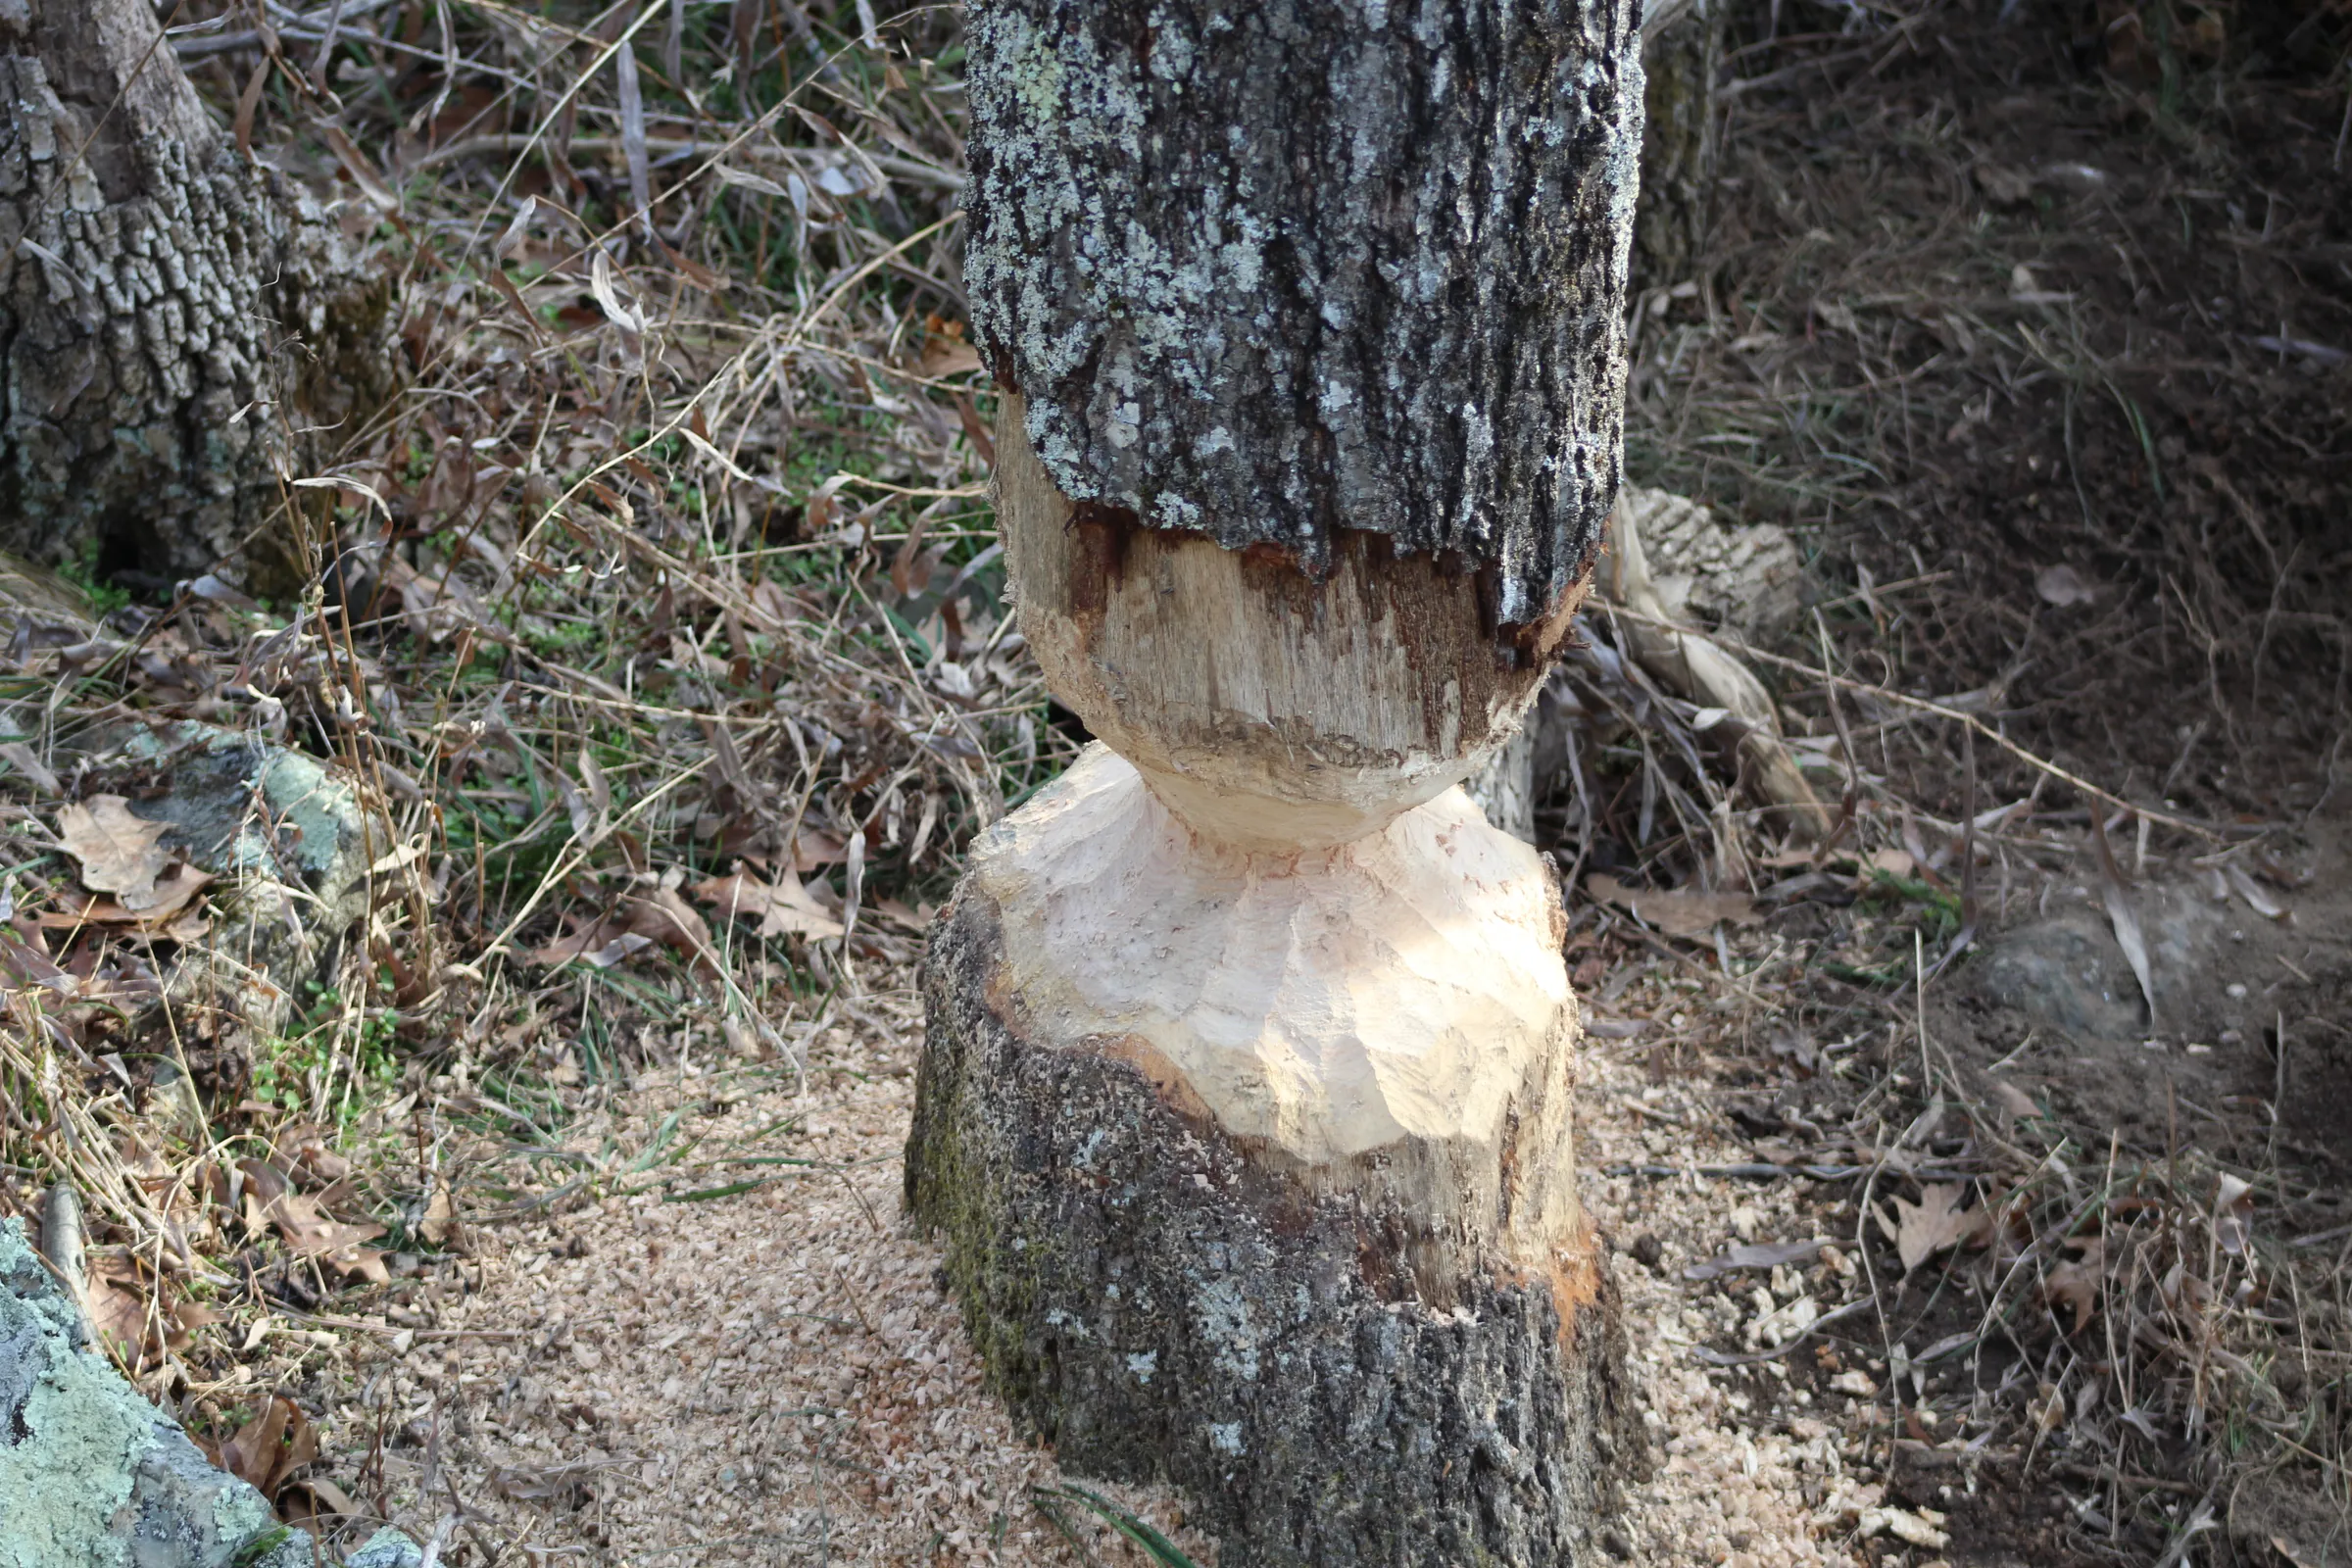 Tree partially chewed by a beaver